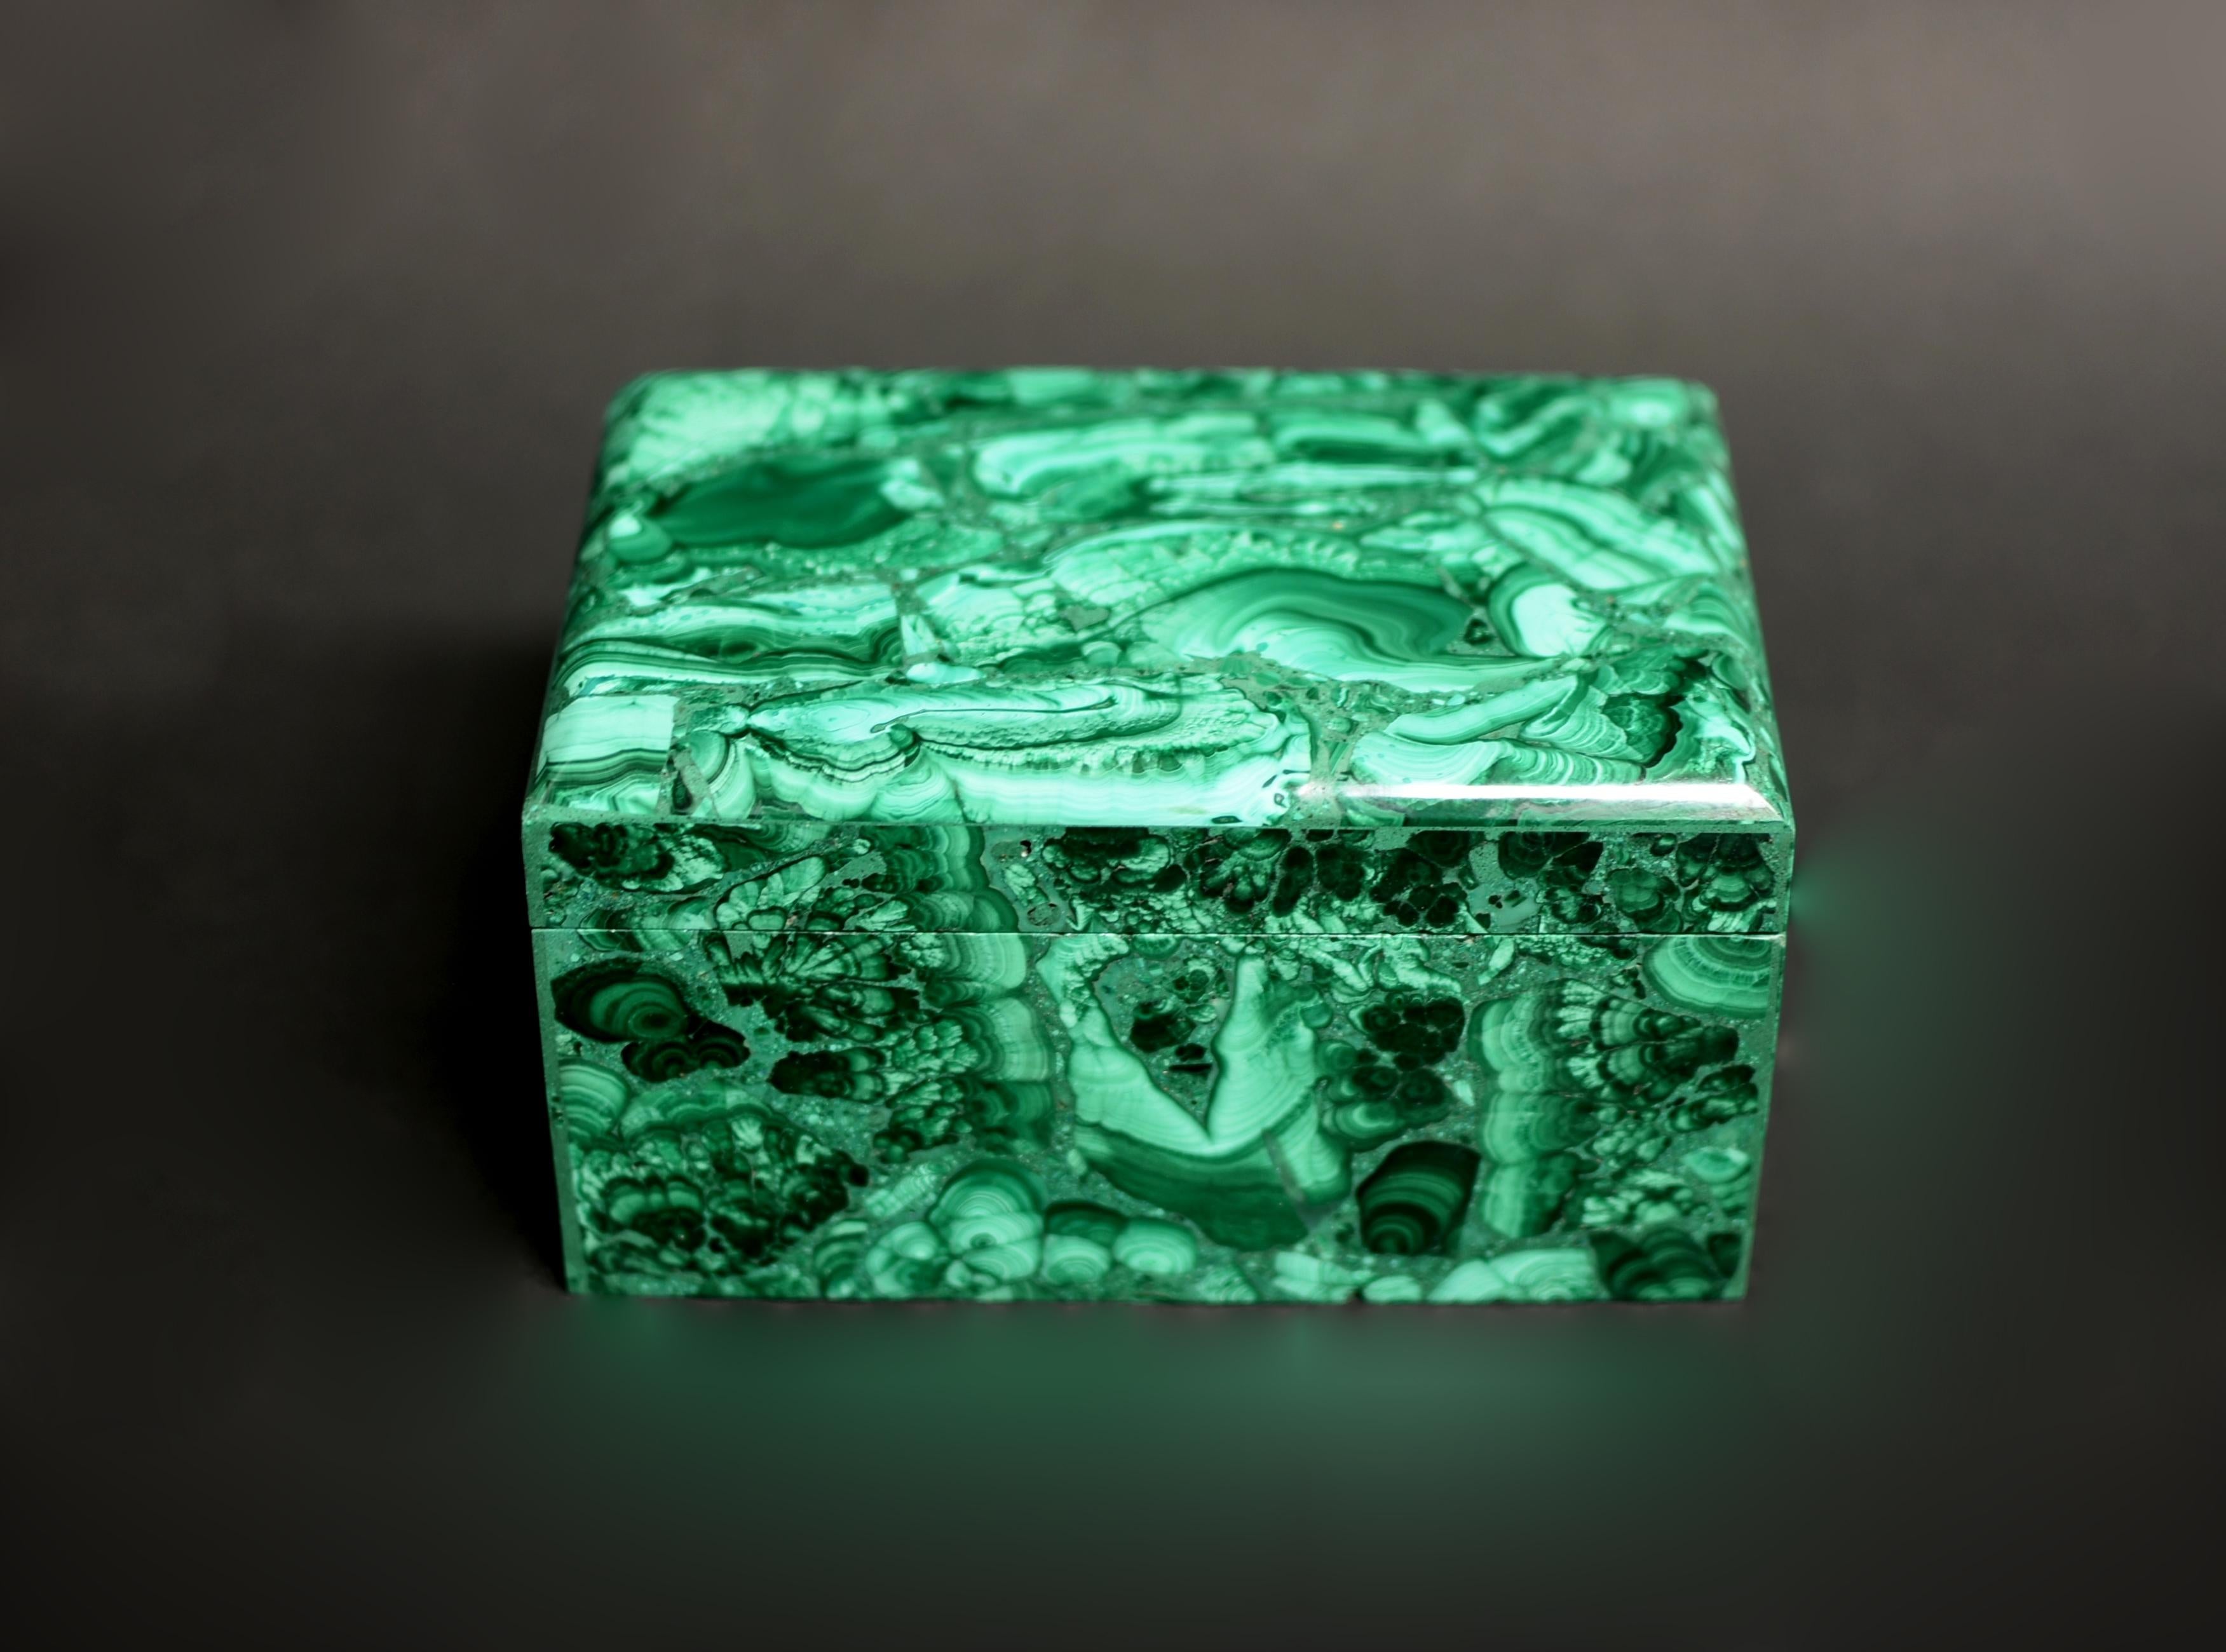 A beautiful 3.3 lb malachite box. This exceptional piece uses carefully selected fine grade gemstone malachite in brilliant green, displaying concentric rings, swirls and stripes. Box is finely crafted and masterfully polished to a lustrous shine. A